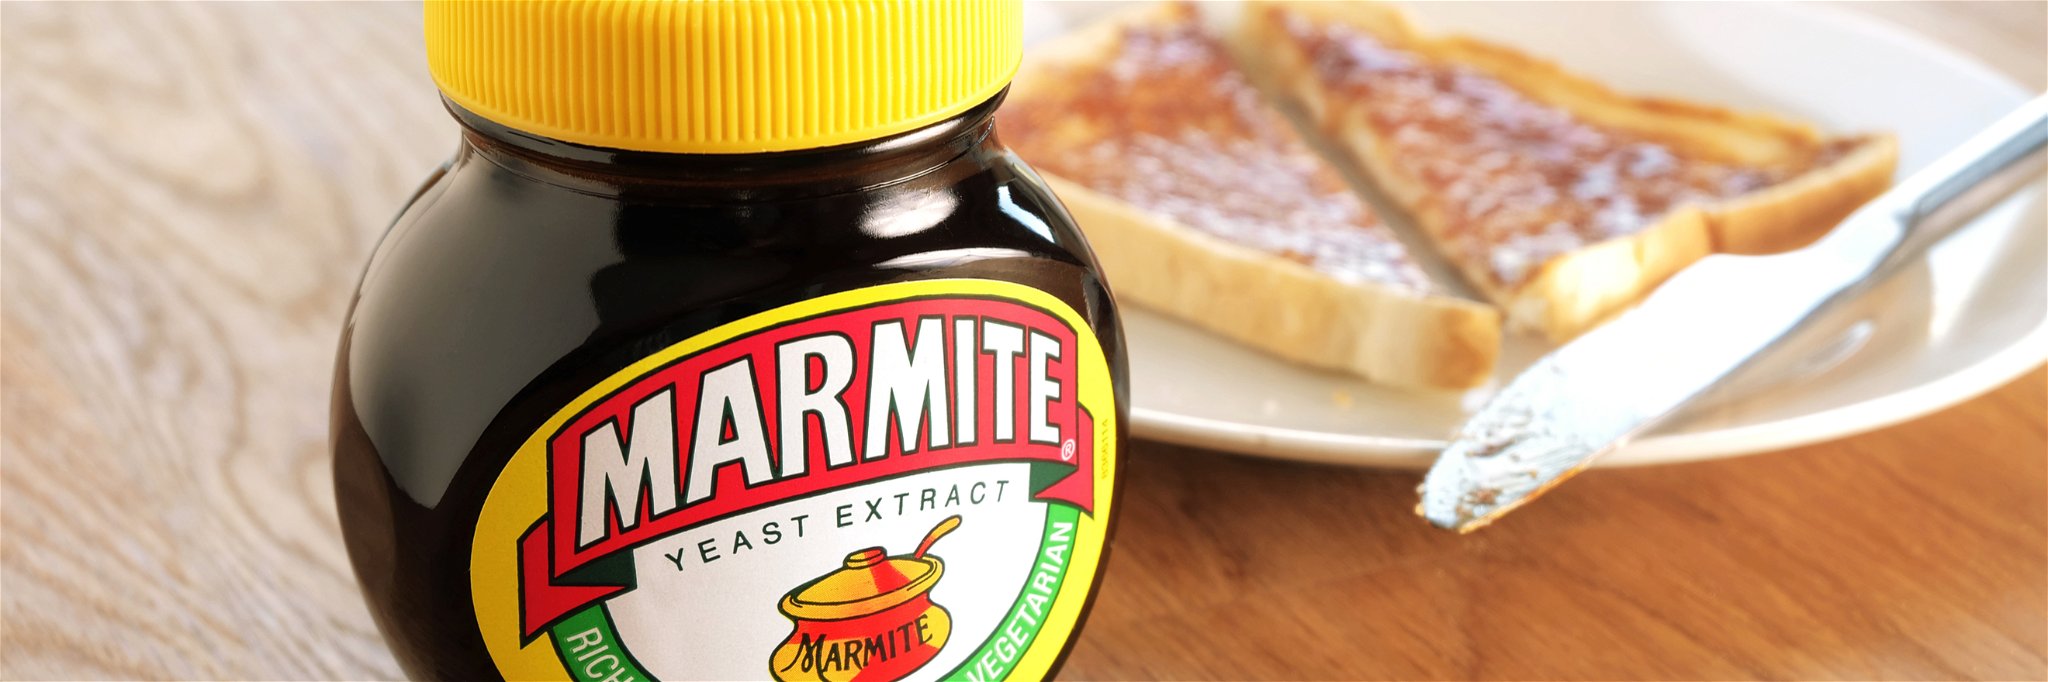 The iconic Marmite spread is now available with truffle flavour